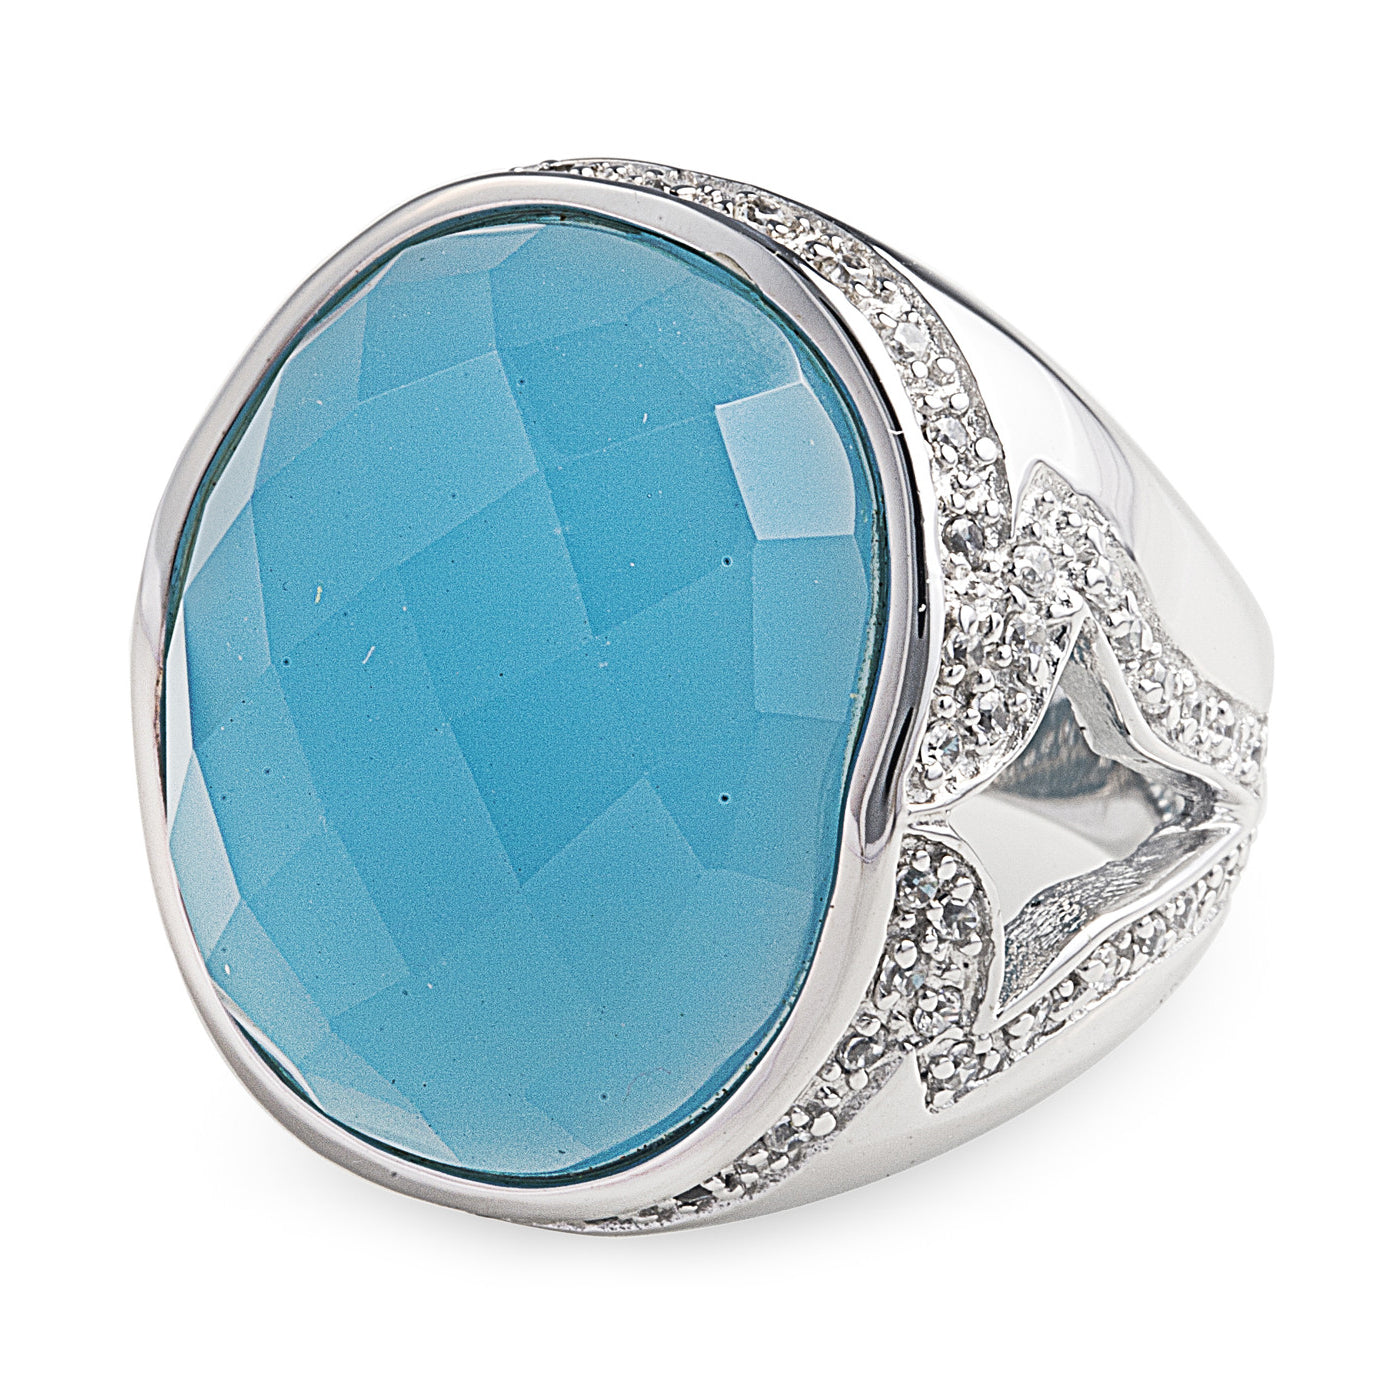 Rings with blue gemstones. 925 sterling silver jewellery. Worldwide shipping from Australia.